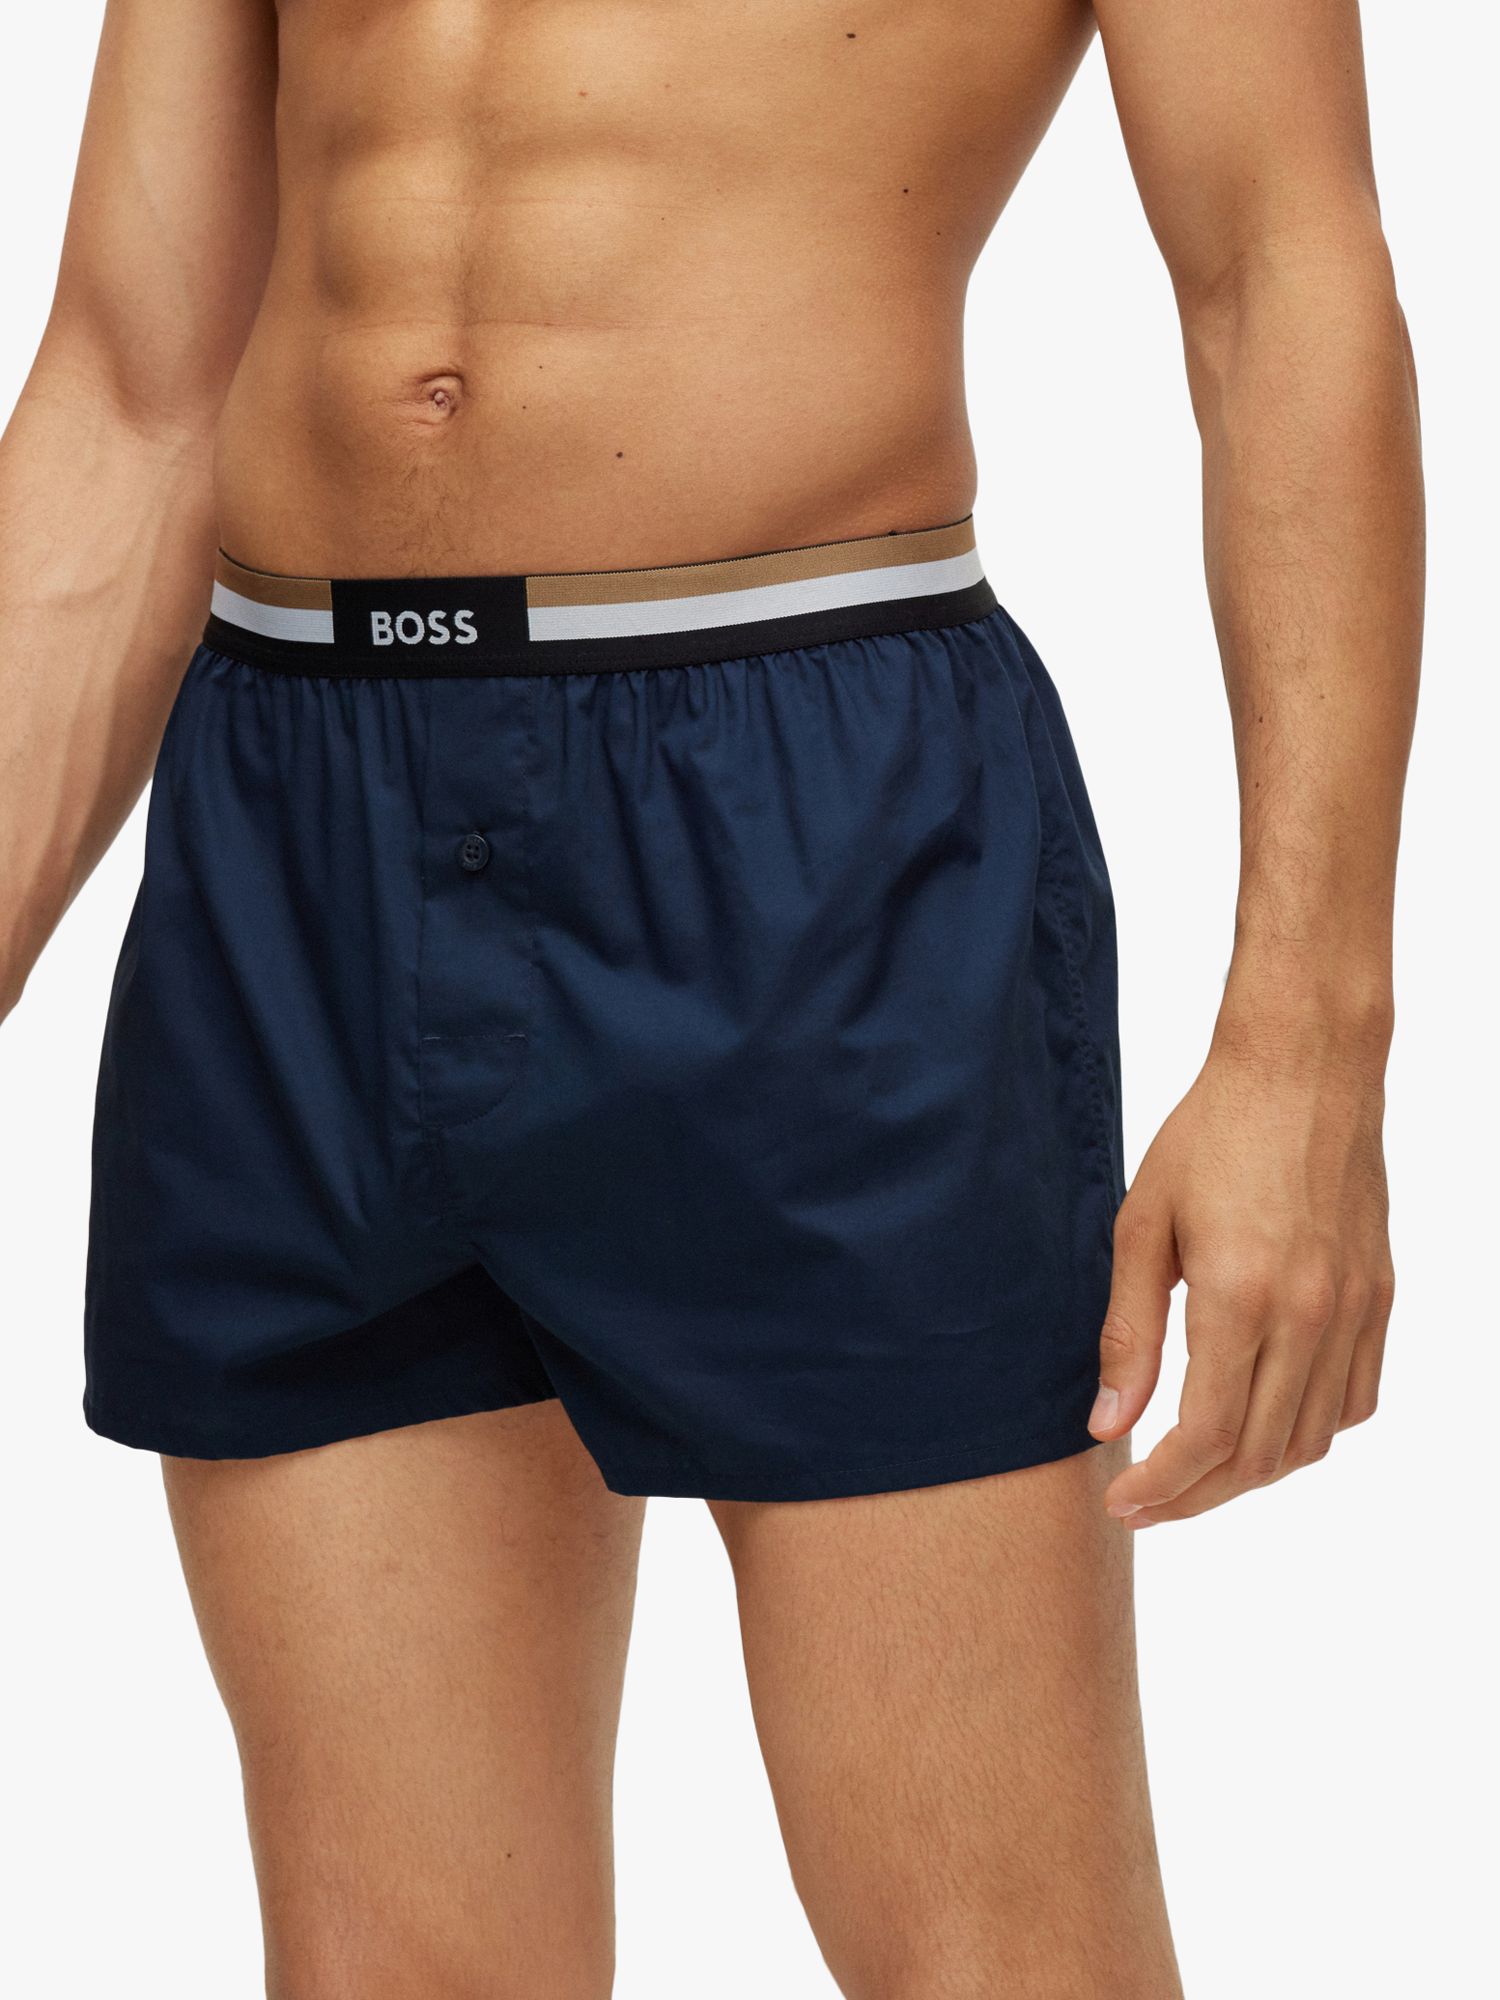 BOSS Cotton Boxers, Pack of 2 at John Lewis & Partners